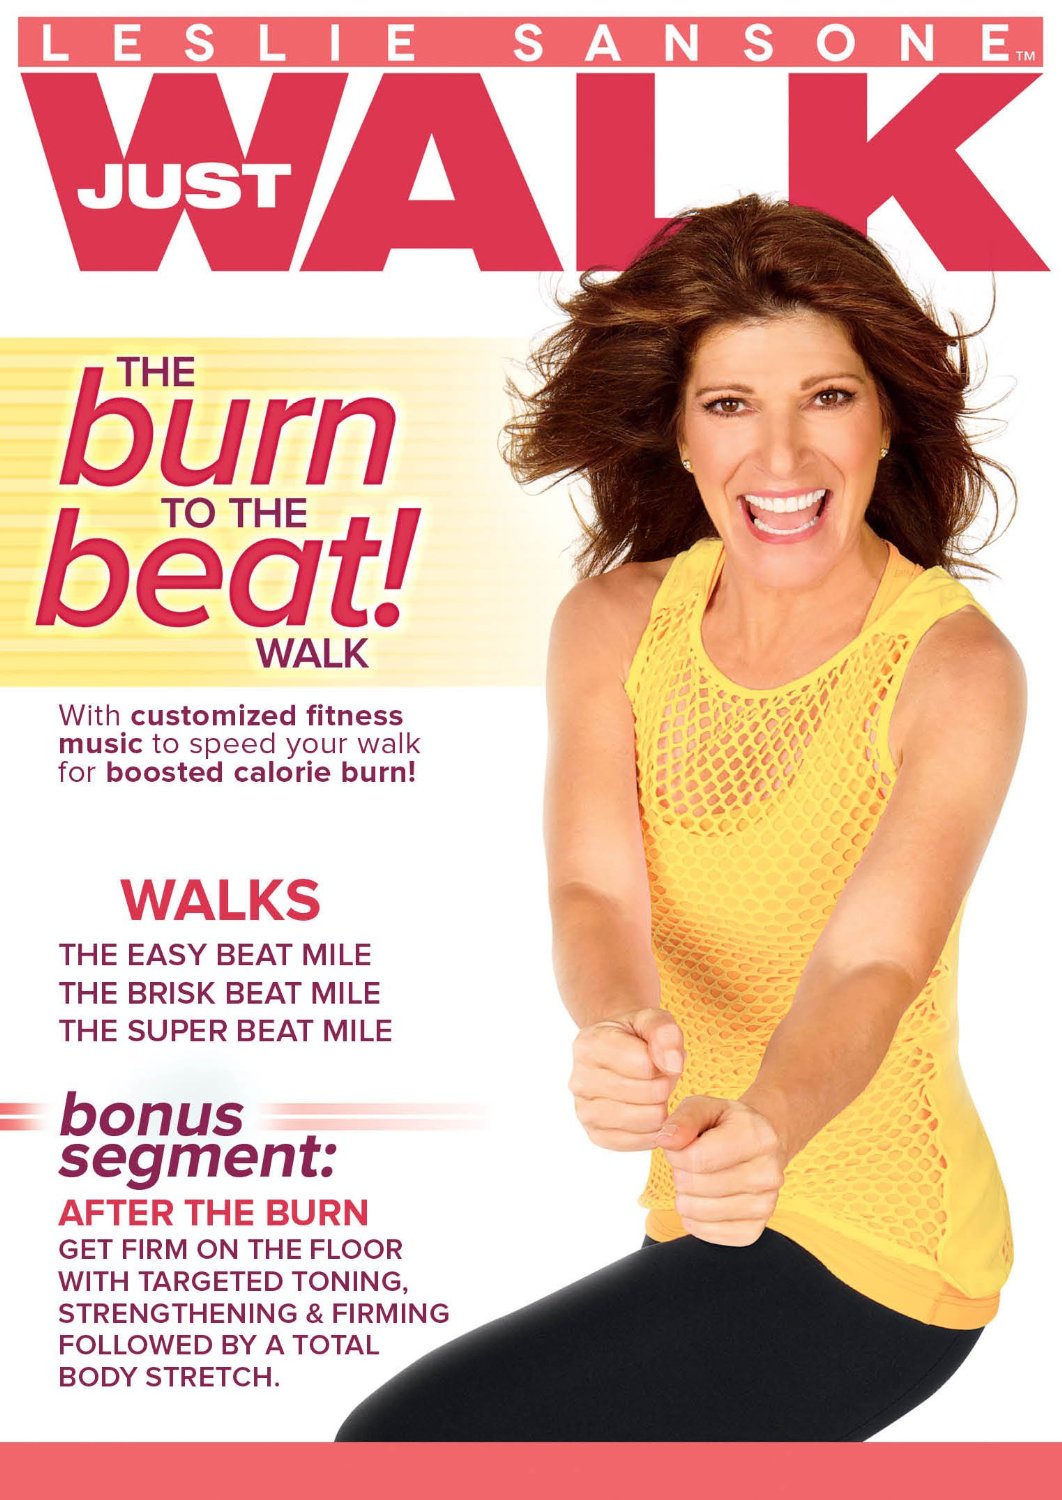 Leslie Sansone “Burn to the Beat” fitness walking dvd review and